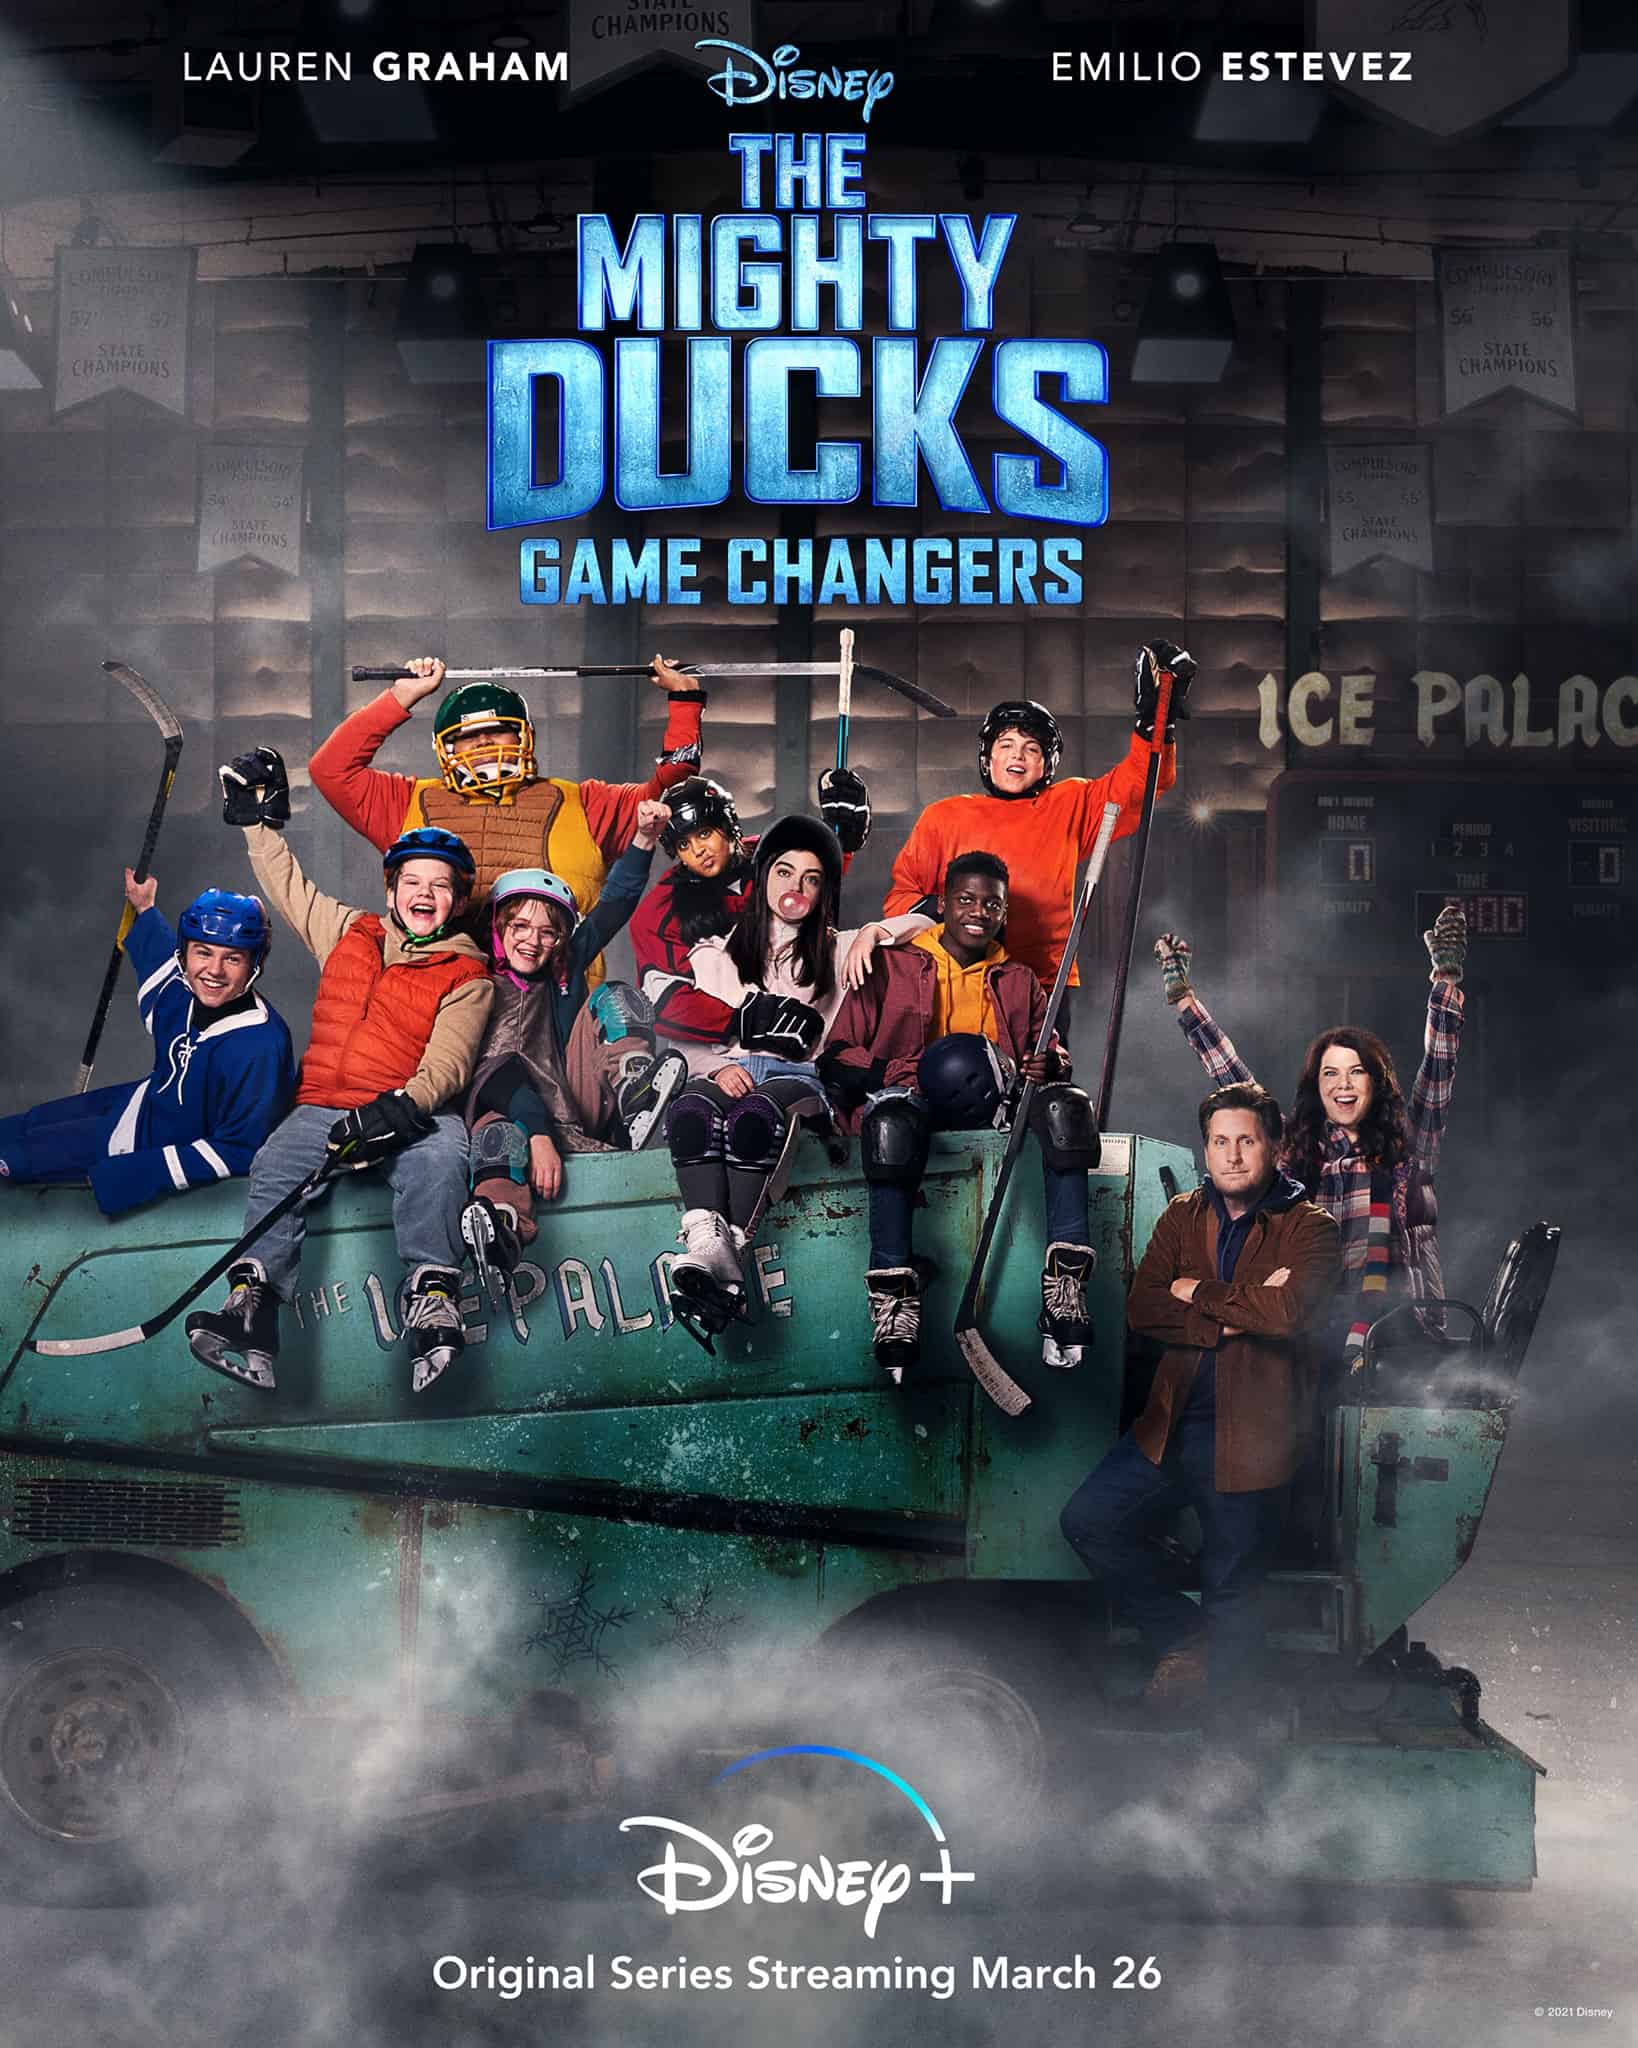 The Mighty Ducks Game Changers Poster Disney+ Original Series